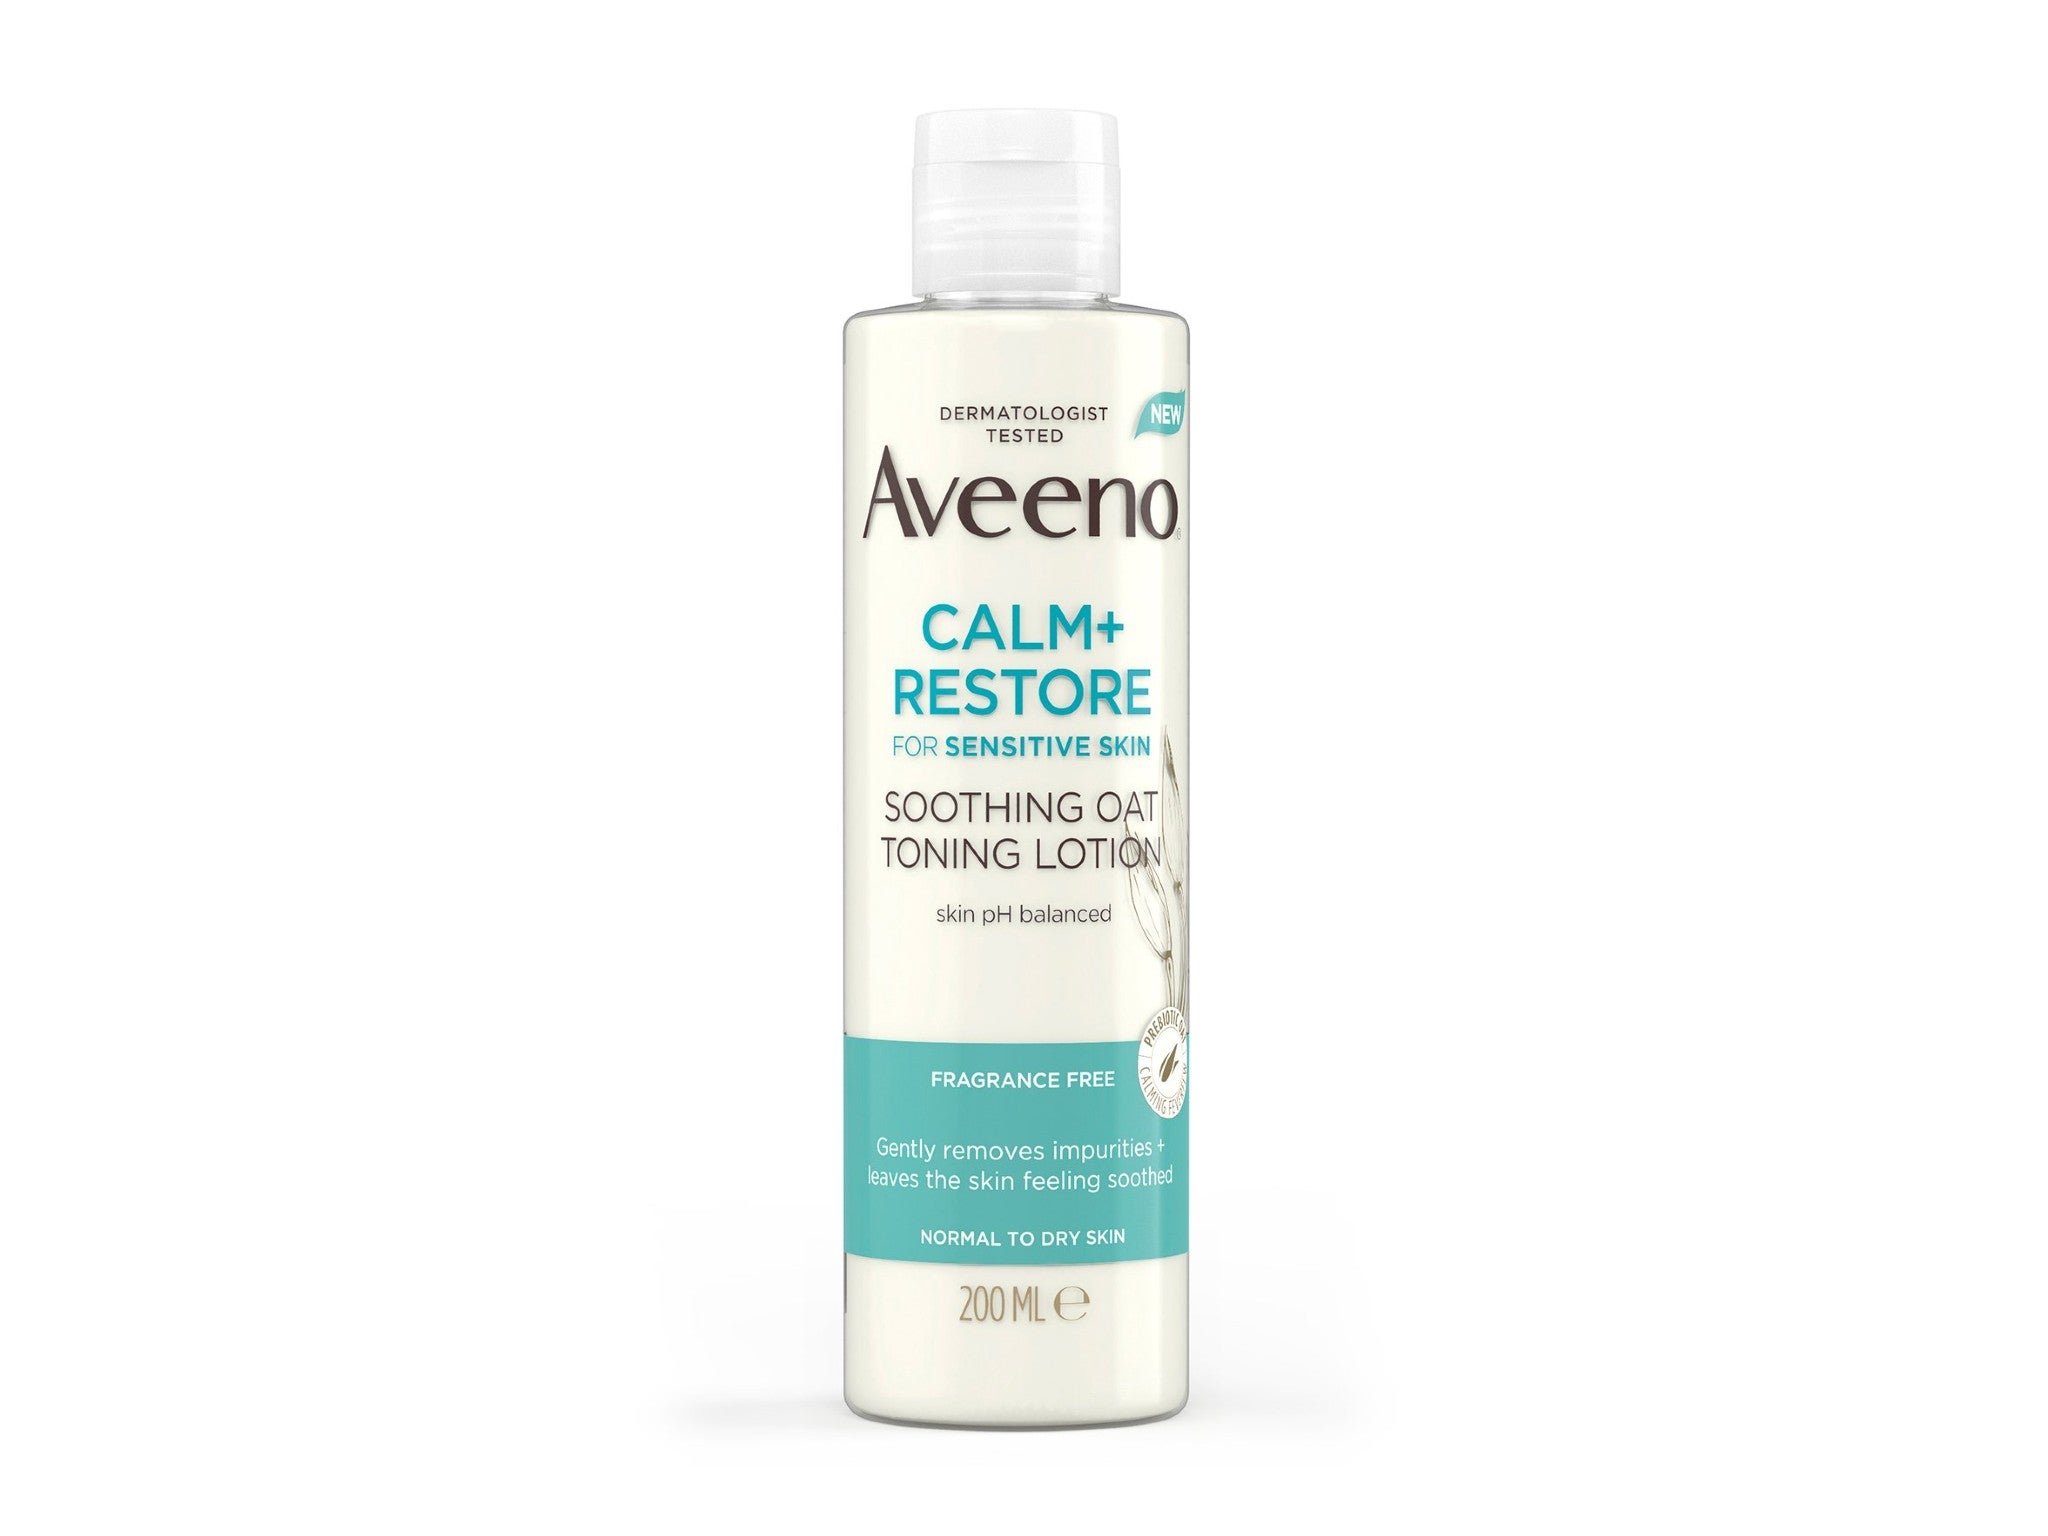 Aveeno face calm and restore soothing oat toning lotion indybest.jpg